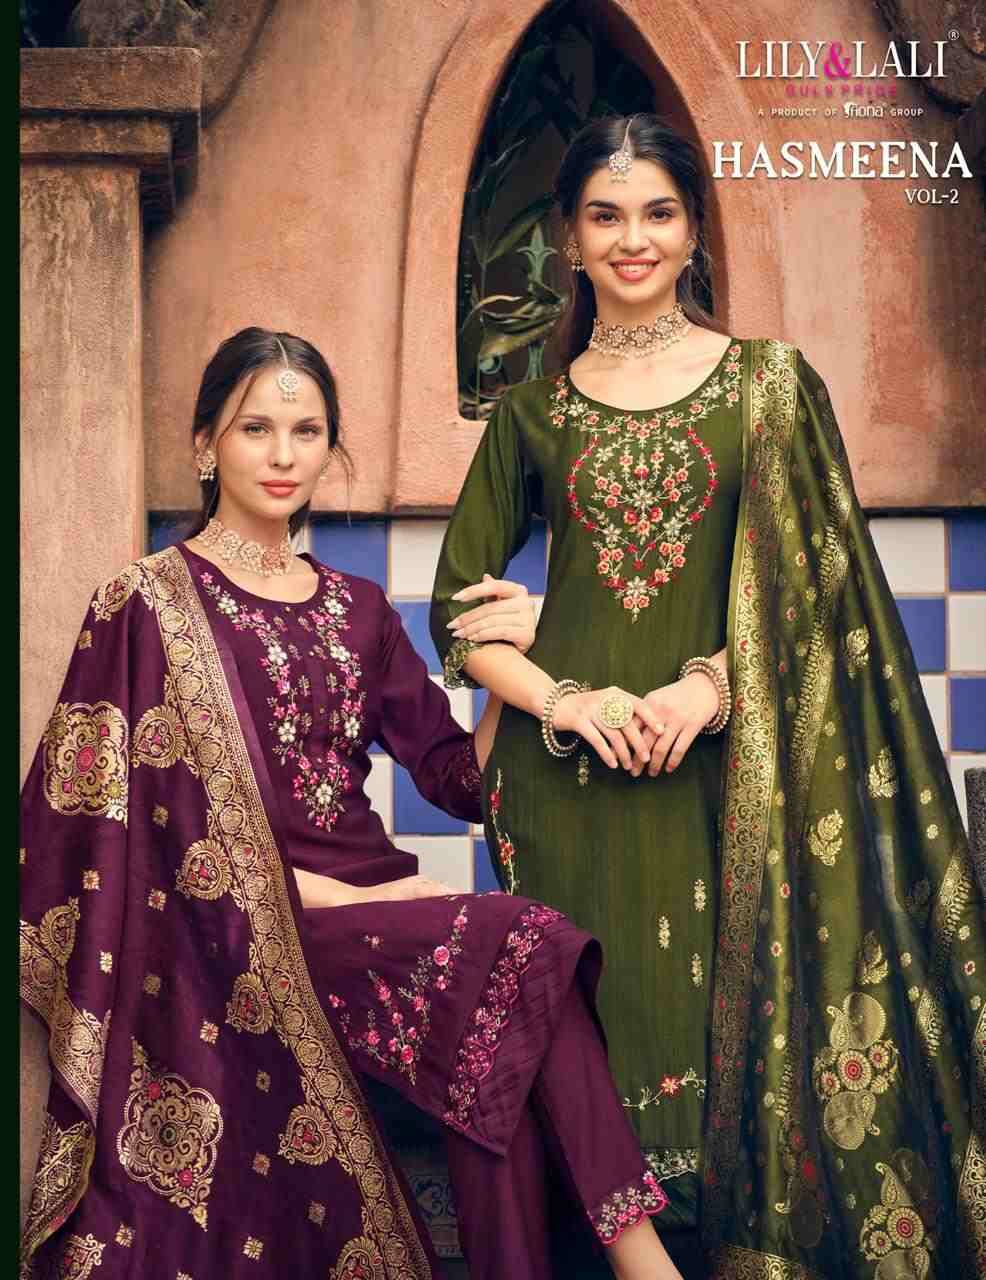 Hasmeena Vol-2 By Lily And Lali 15501 To 15506 Series Designer Festive Suits Collection Beautiful Stylish Fancy Colorful Party Wear & Occasional Wear Viscose Organza Dresses At Wholesale Price